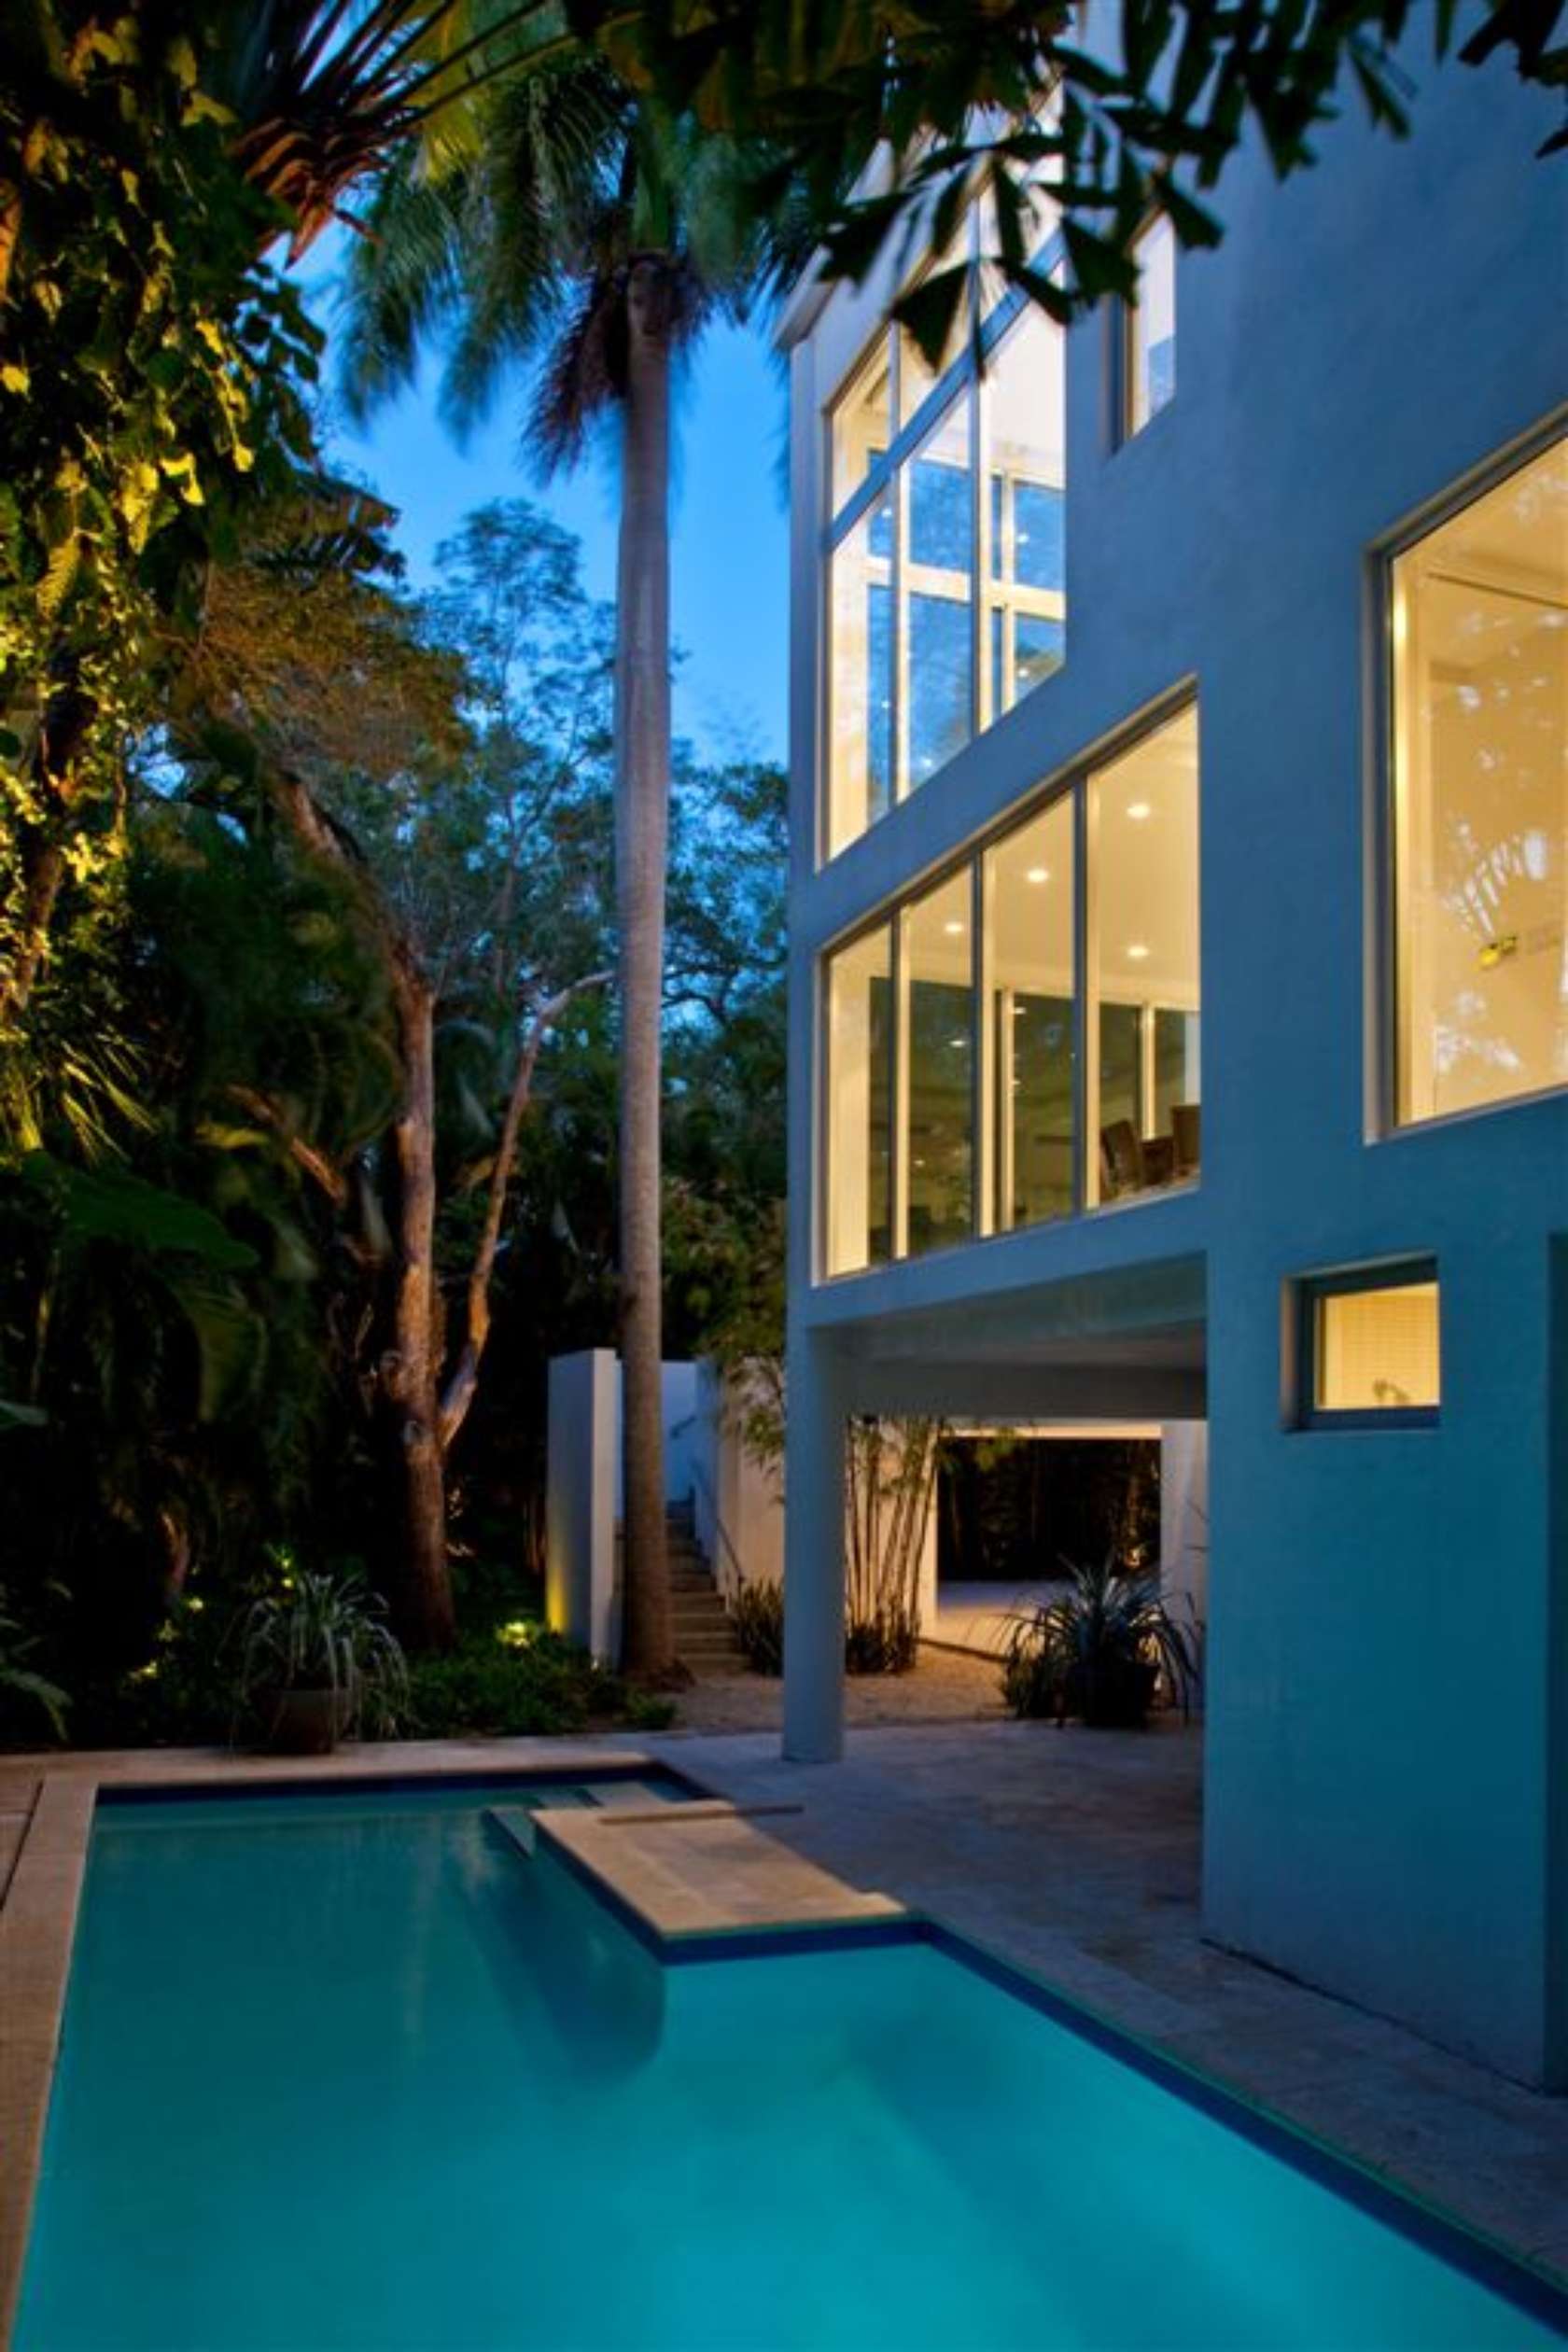 Calm and Minimalistic Spaces of Utopia Residence Coconut Grove by [STRANG] Architecture-01